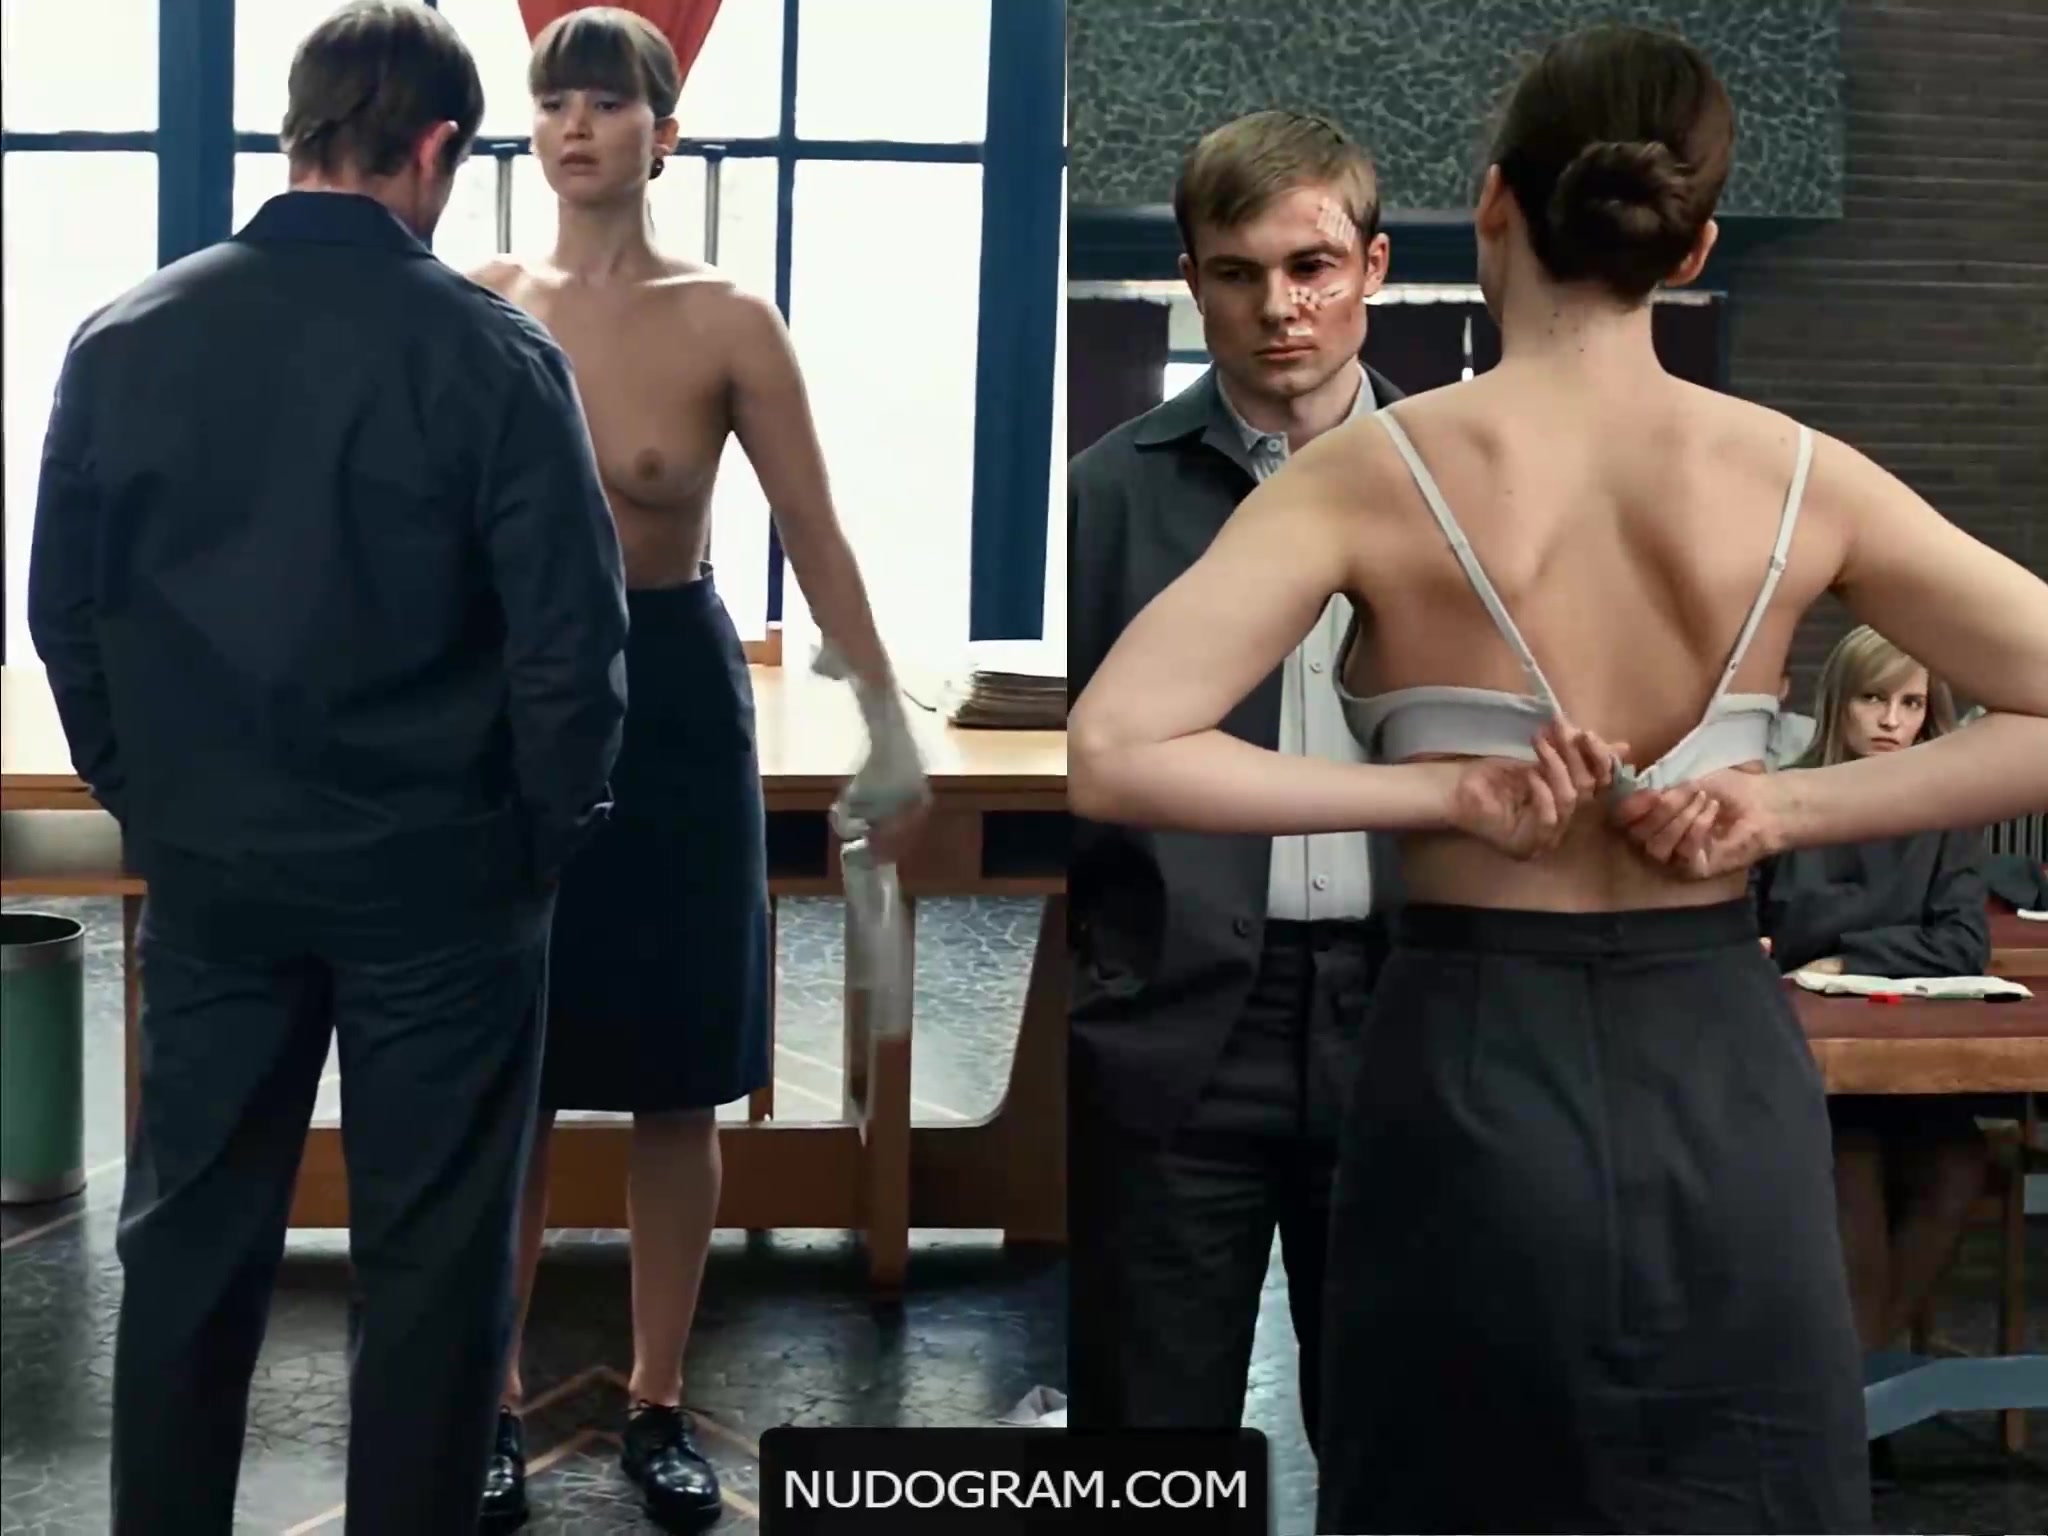 Jennifer Lawrence Nude Scene From Remastered And Enhanced | Nudogram